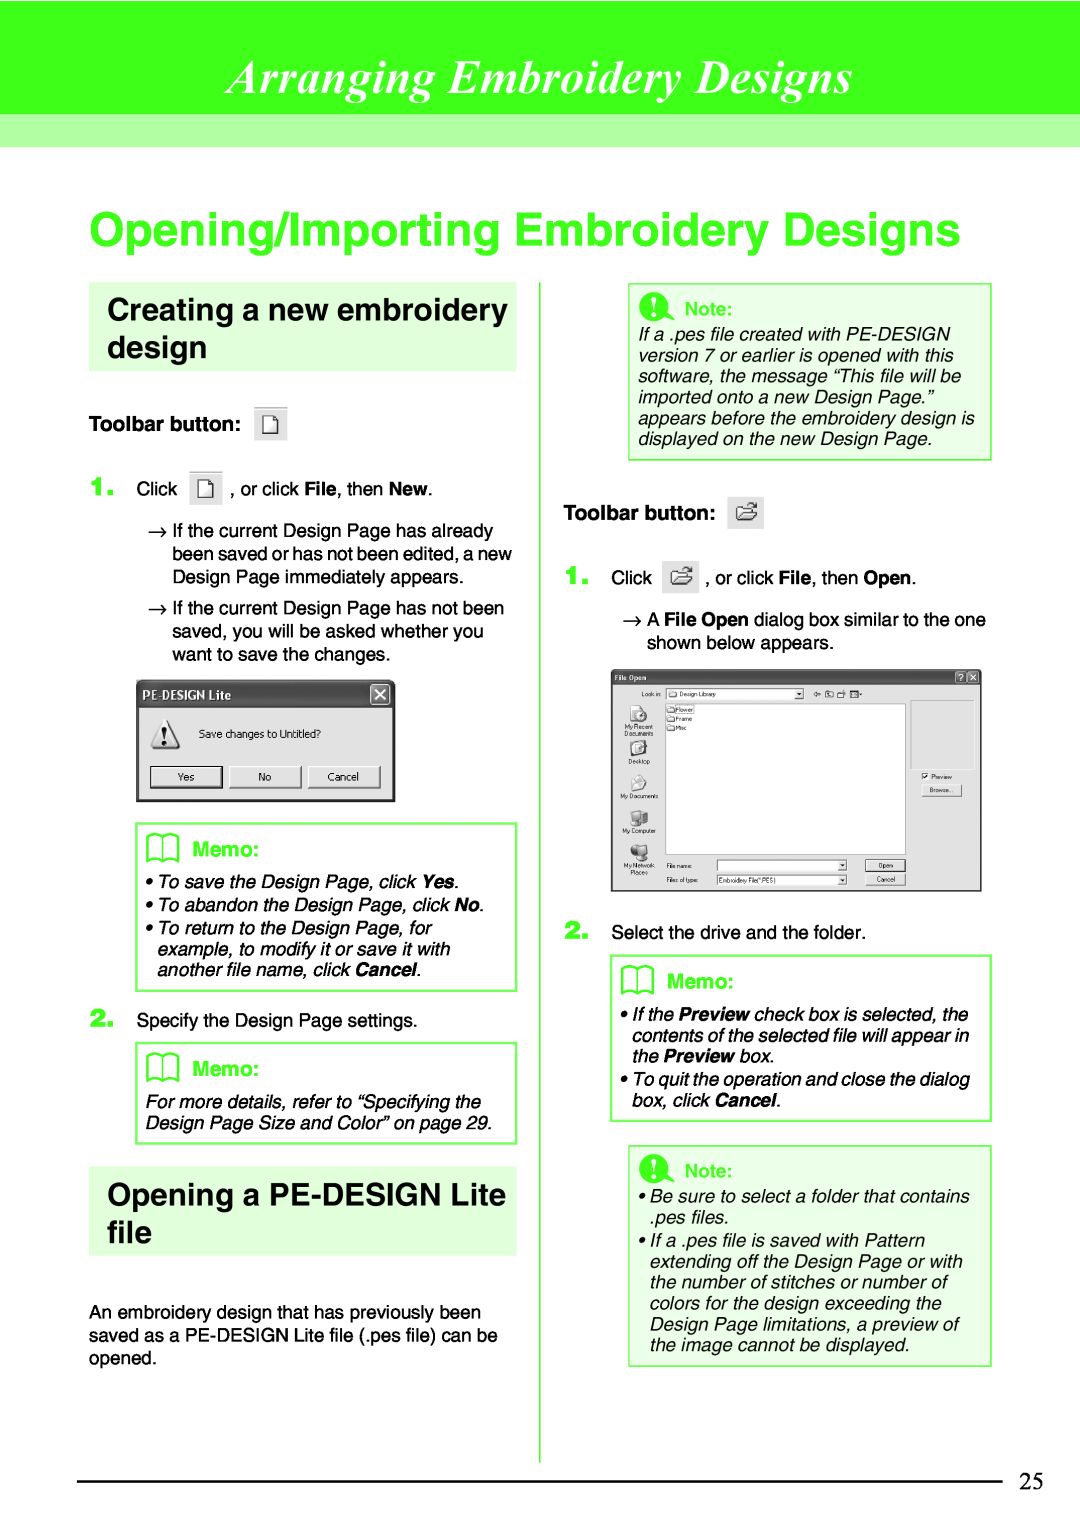 Brother Brother USB Writer Arranging Embroidery Designs, Opening/Importing Embroidery Designs, Toolbar button, b Memo 